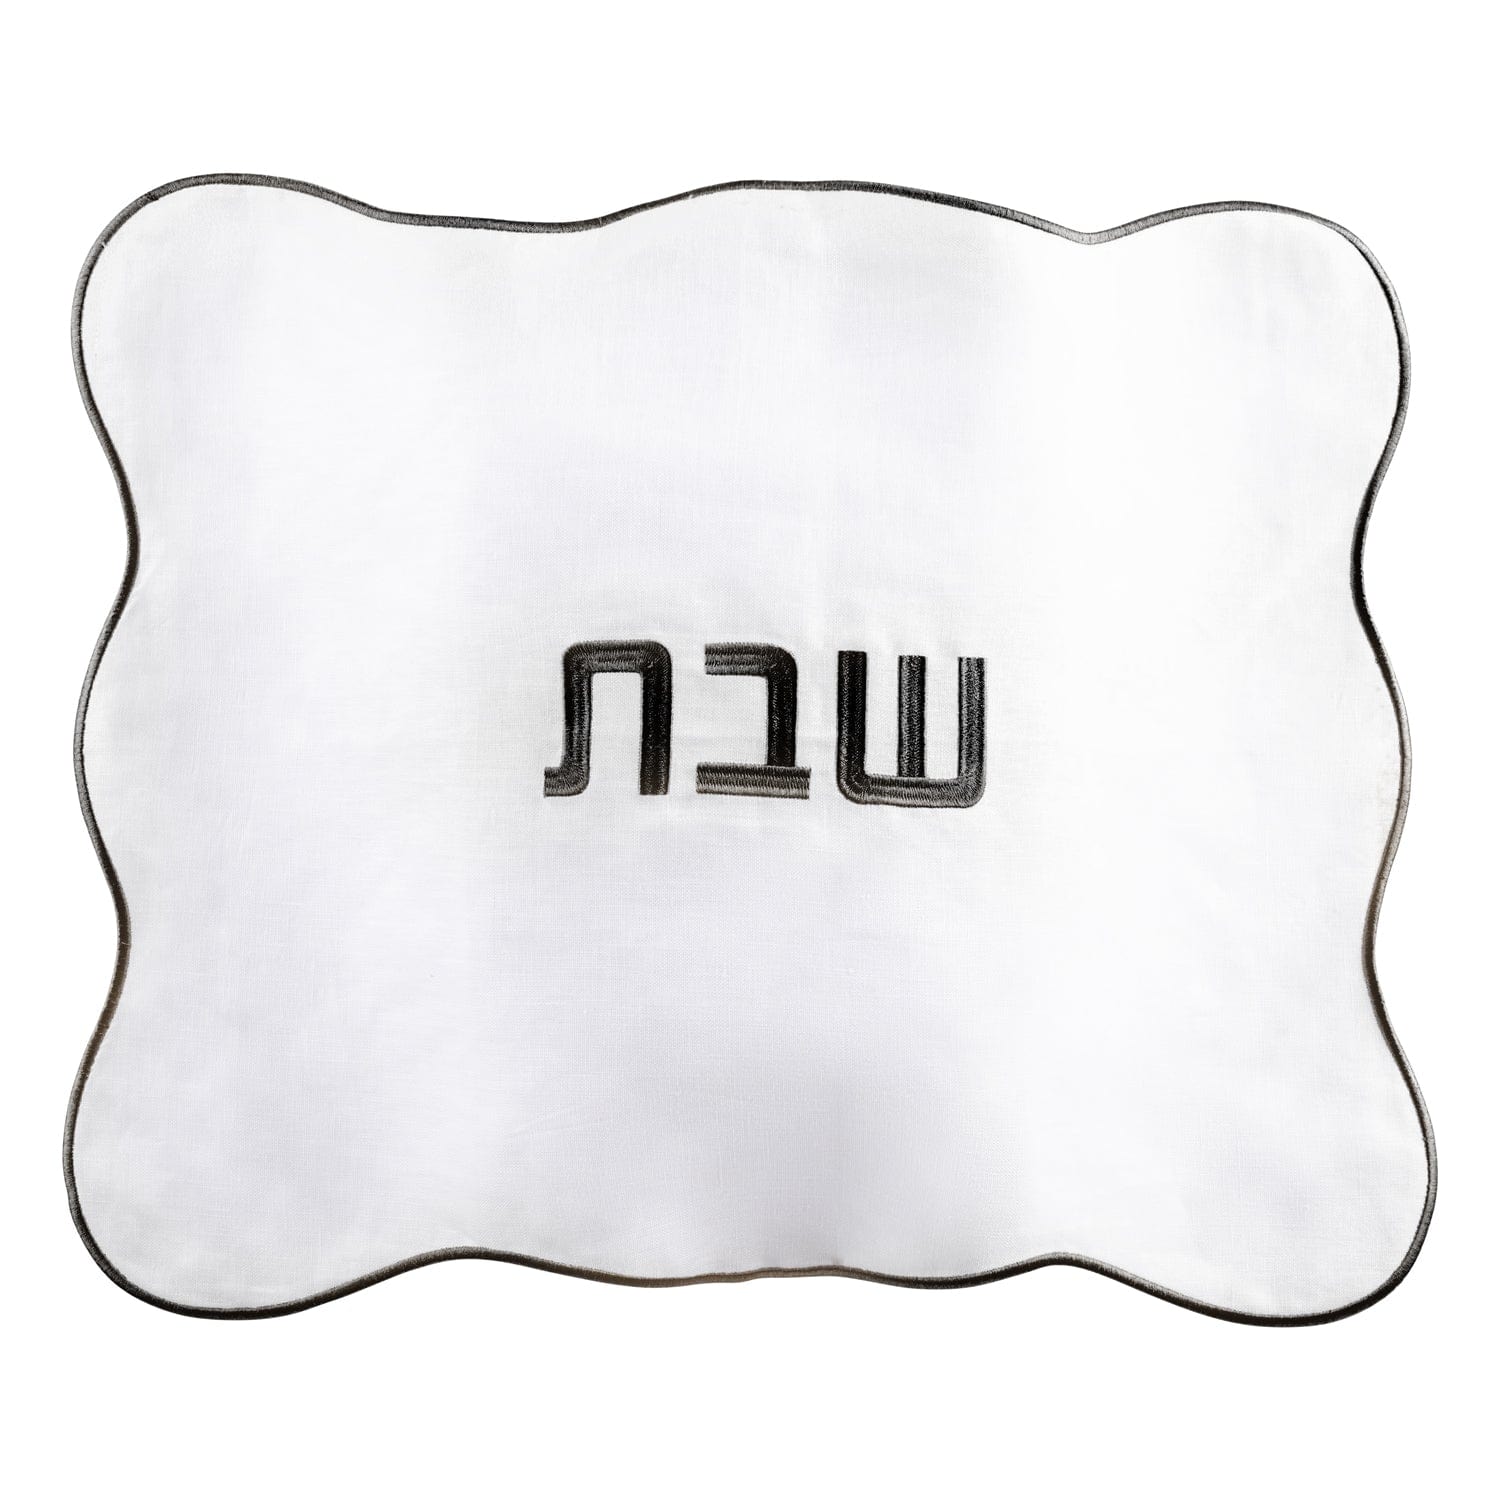 Wavy Linen Challah Cover - Waterdale Collection